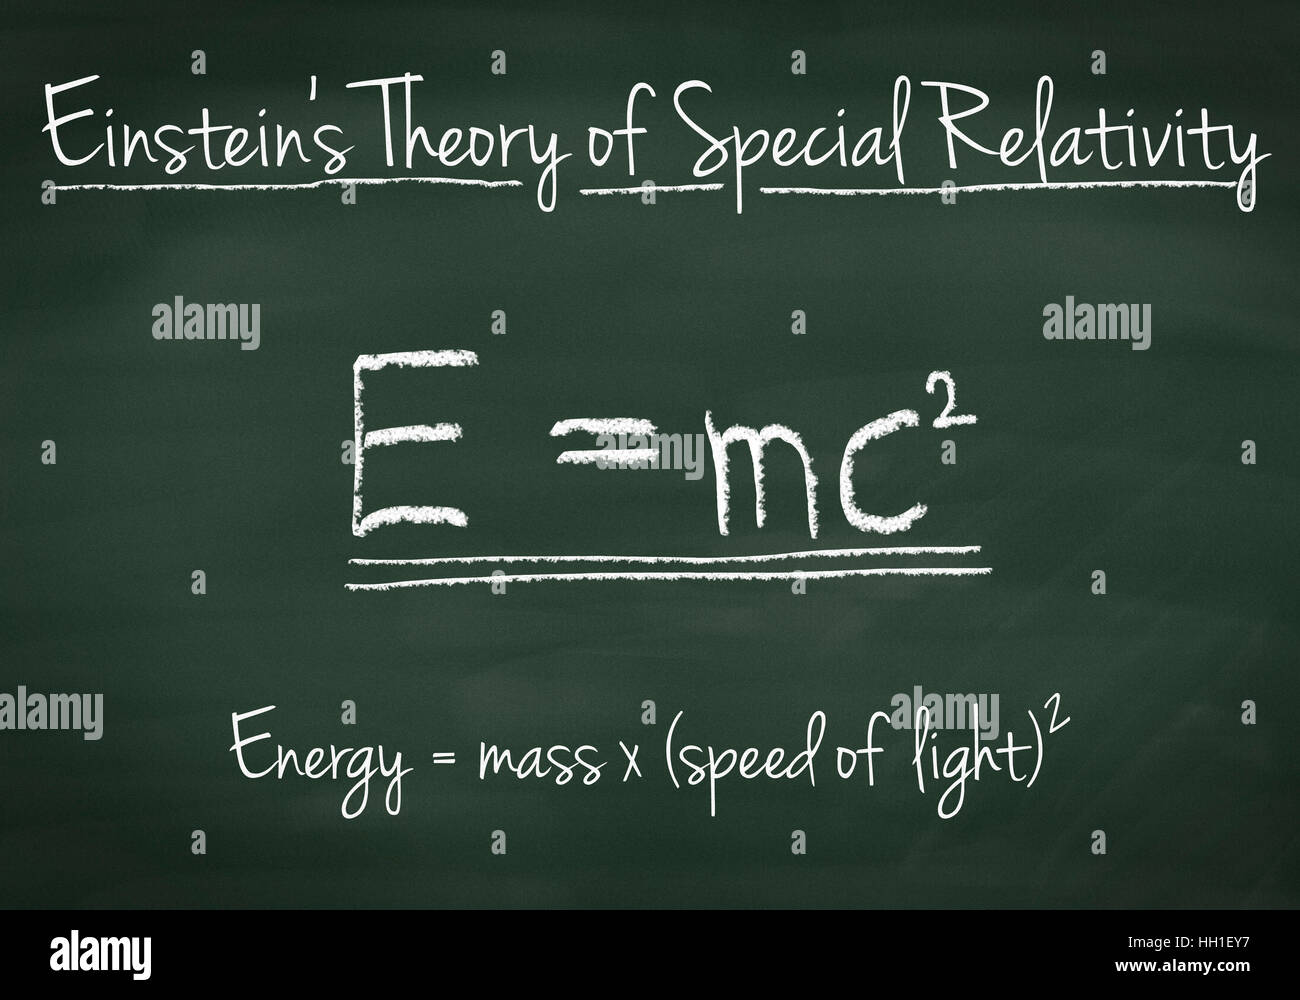 Einstein’s Theory of Special Relativity explained on a chalkboard Stock Photo